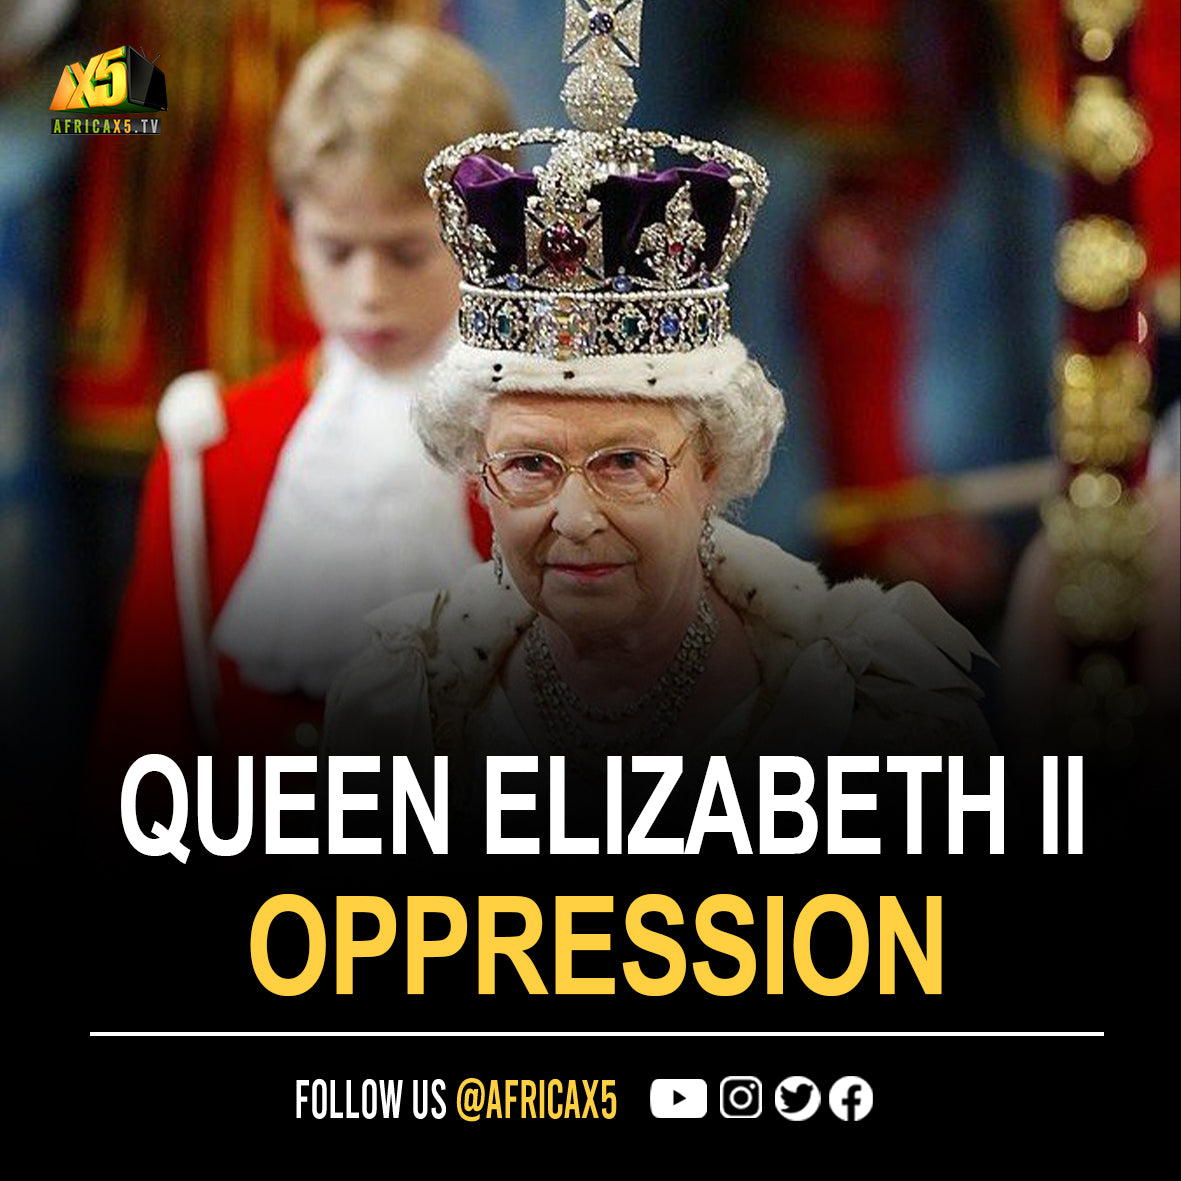 Queen Elizabeth II has died. Oppressed people worldwide will remember her for shamelessly living off the wealth her family reaped from the profits of slavery.